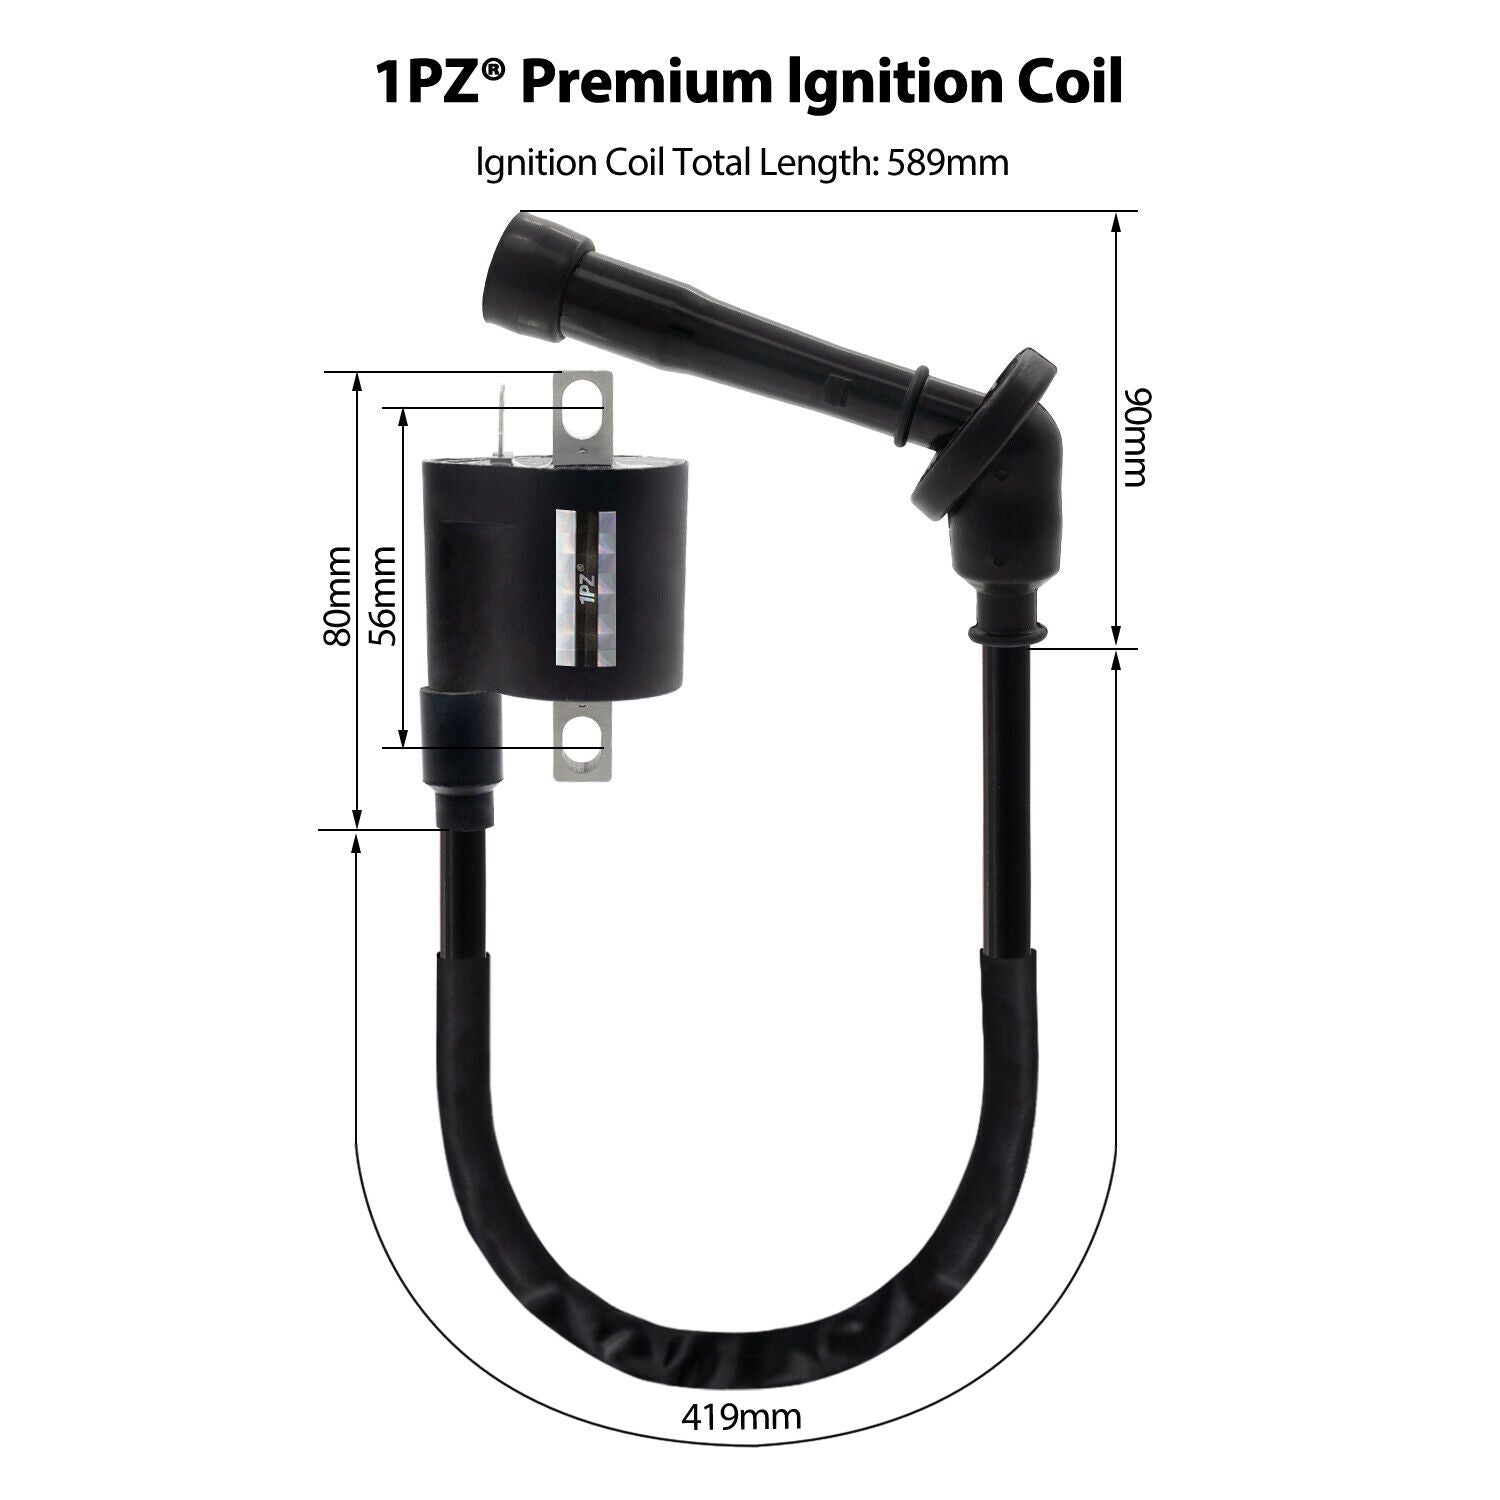 1PZ Ignition Coil Spark Plug Replacement for Yamaha Raptor 660R Grizzly Rhino 660 YFM660 YXR660 2001-2008